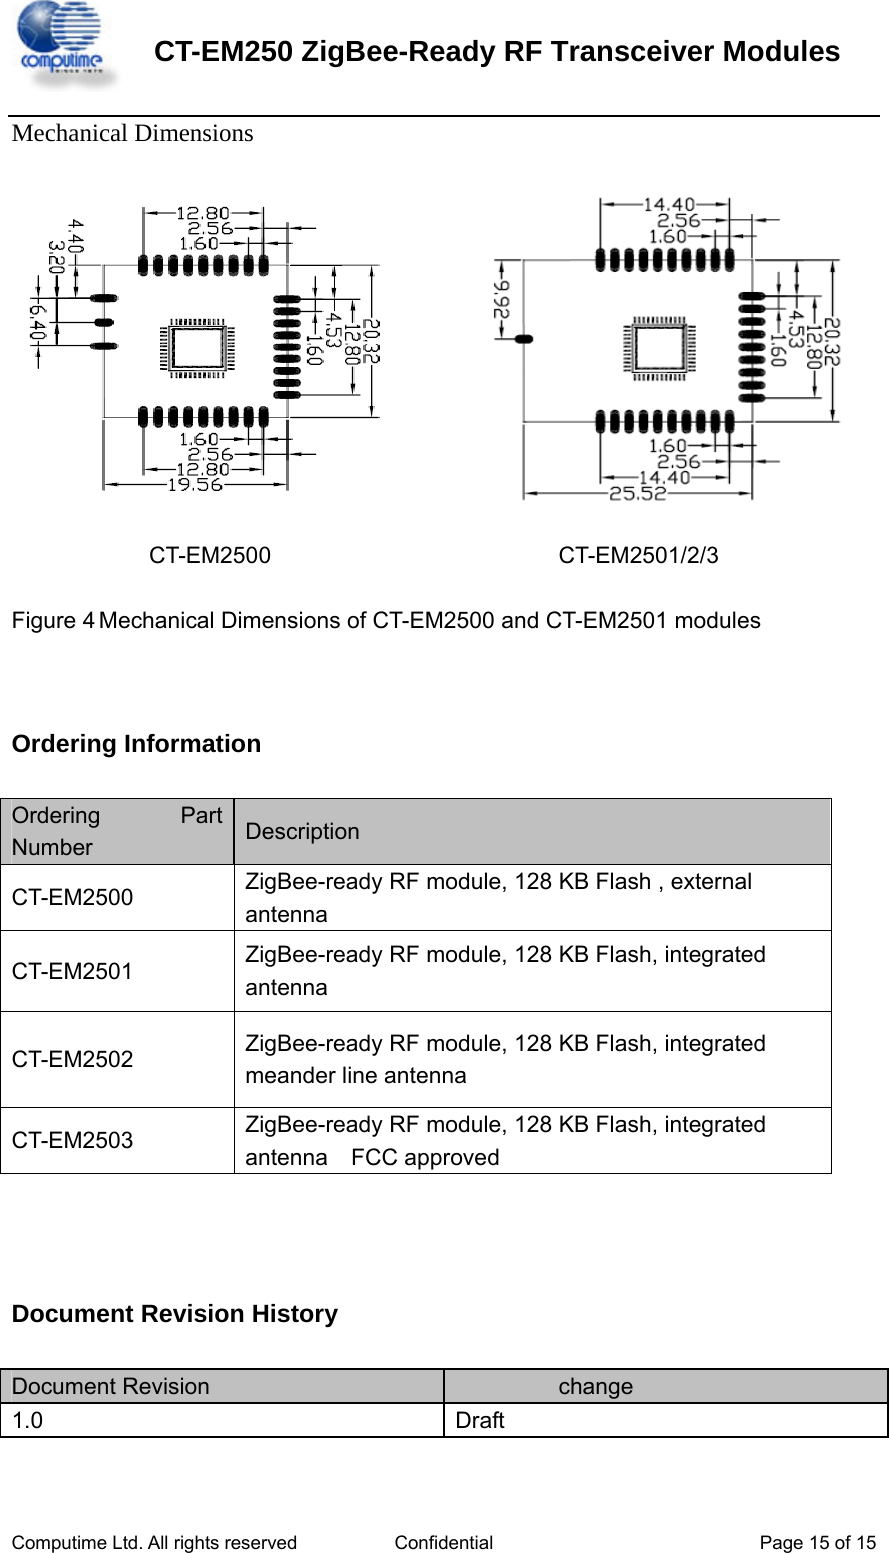    CT-EM250 ZigBee-Ready RF Transceiver Modules   Computime Ltd. All rights reserved  Confidential  Page 15 of 15   Mechanical Dimensions                CT-EM2500            CT-EM2501/2/3  Figure 4 Mechanical Dimensions of CT-EM2500 and CT-EM2501 modules   Ordering Information  Ordering Part Number   Description  CT-EM2500  ZigBee-ready RF module, 128 KB Flash , external antenna CT-EM2501  ZigBee-ready RF module, 128 KB Flash, integrated antenna  CT-EM2502  ZigBee-ready RF module, 128 KB Flash, integrated meander line antenna CT-EM2503  ZigBee-ready RF module, 128 KB Flash, integrated antenna  FCC approved     Document Revision History  Document Revision           change 1.0  Draft  